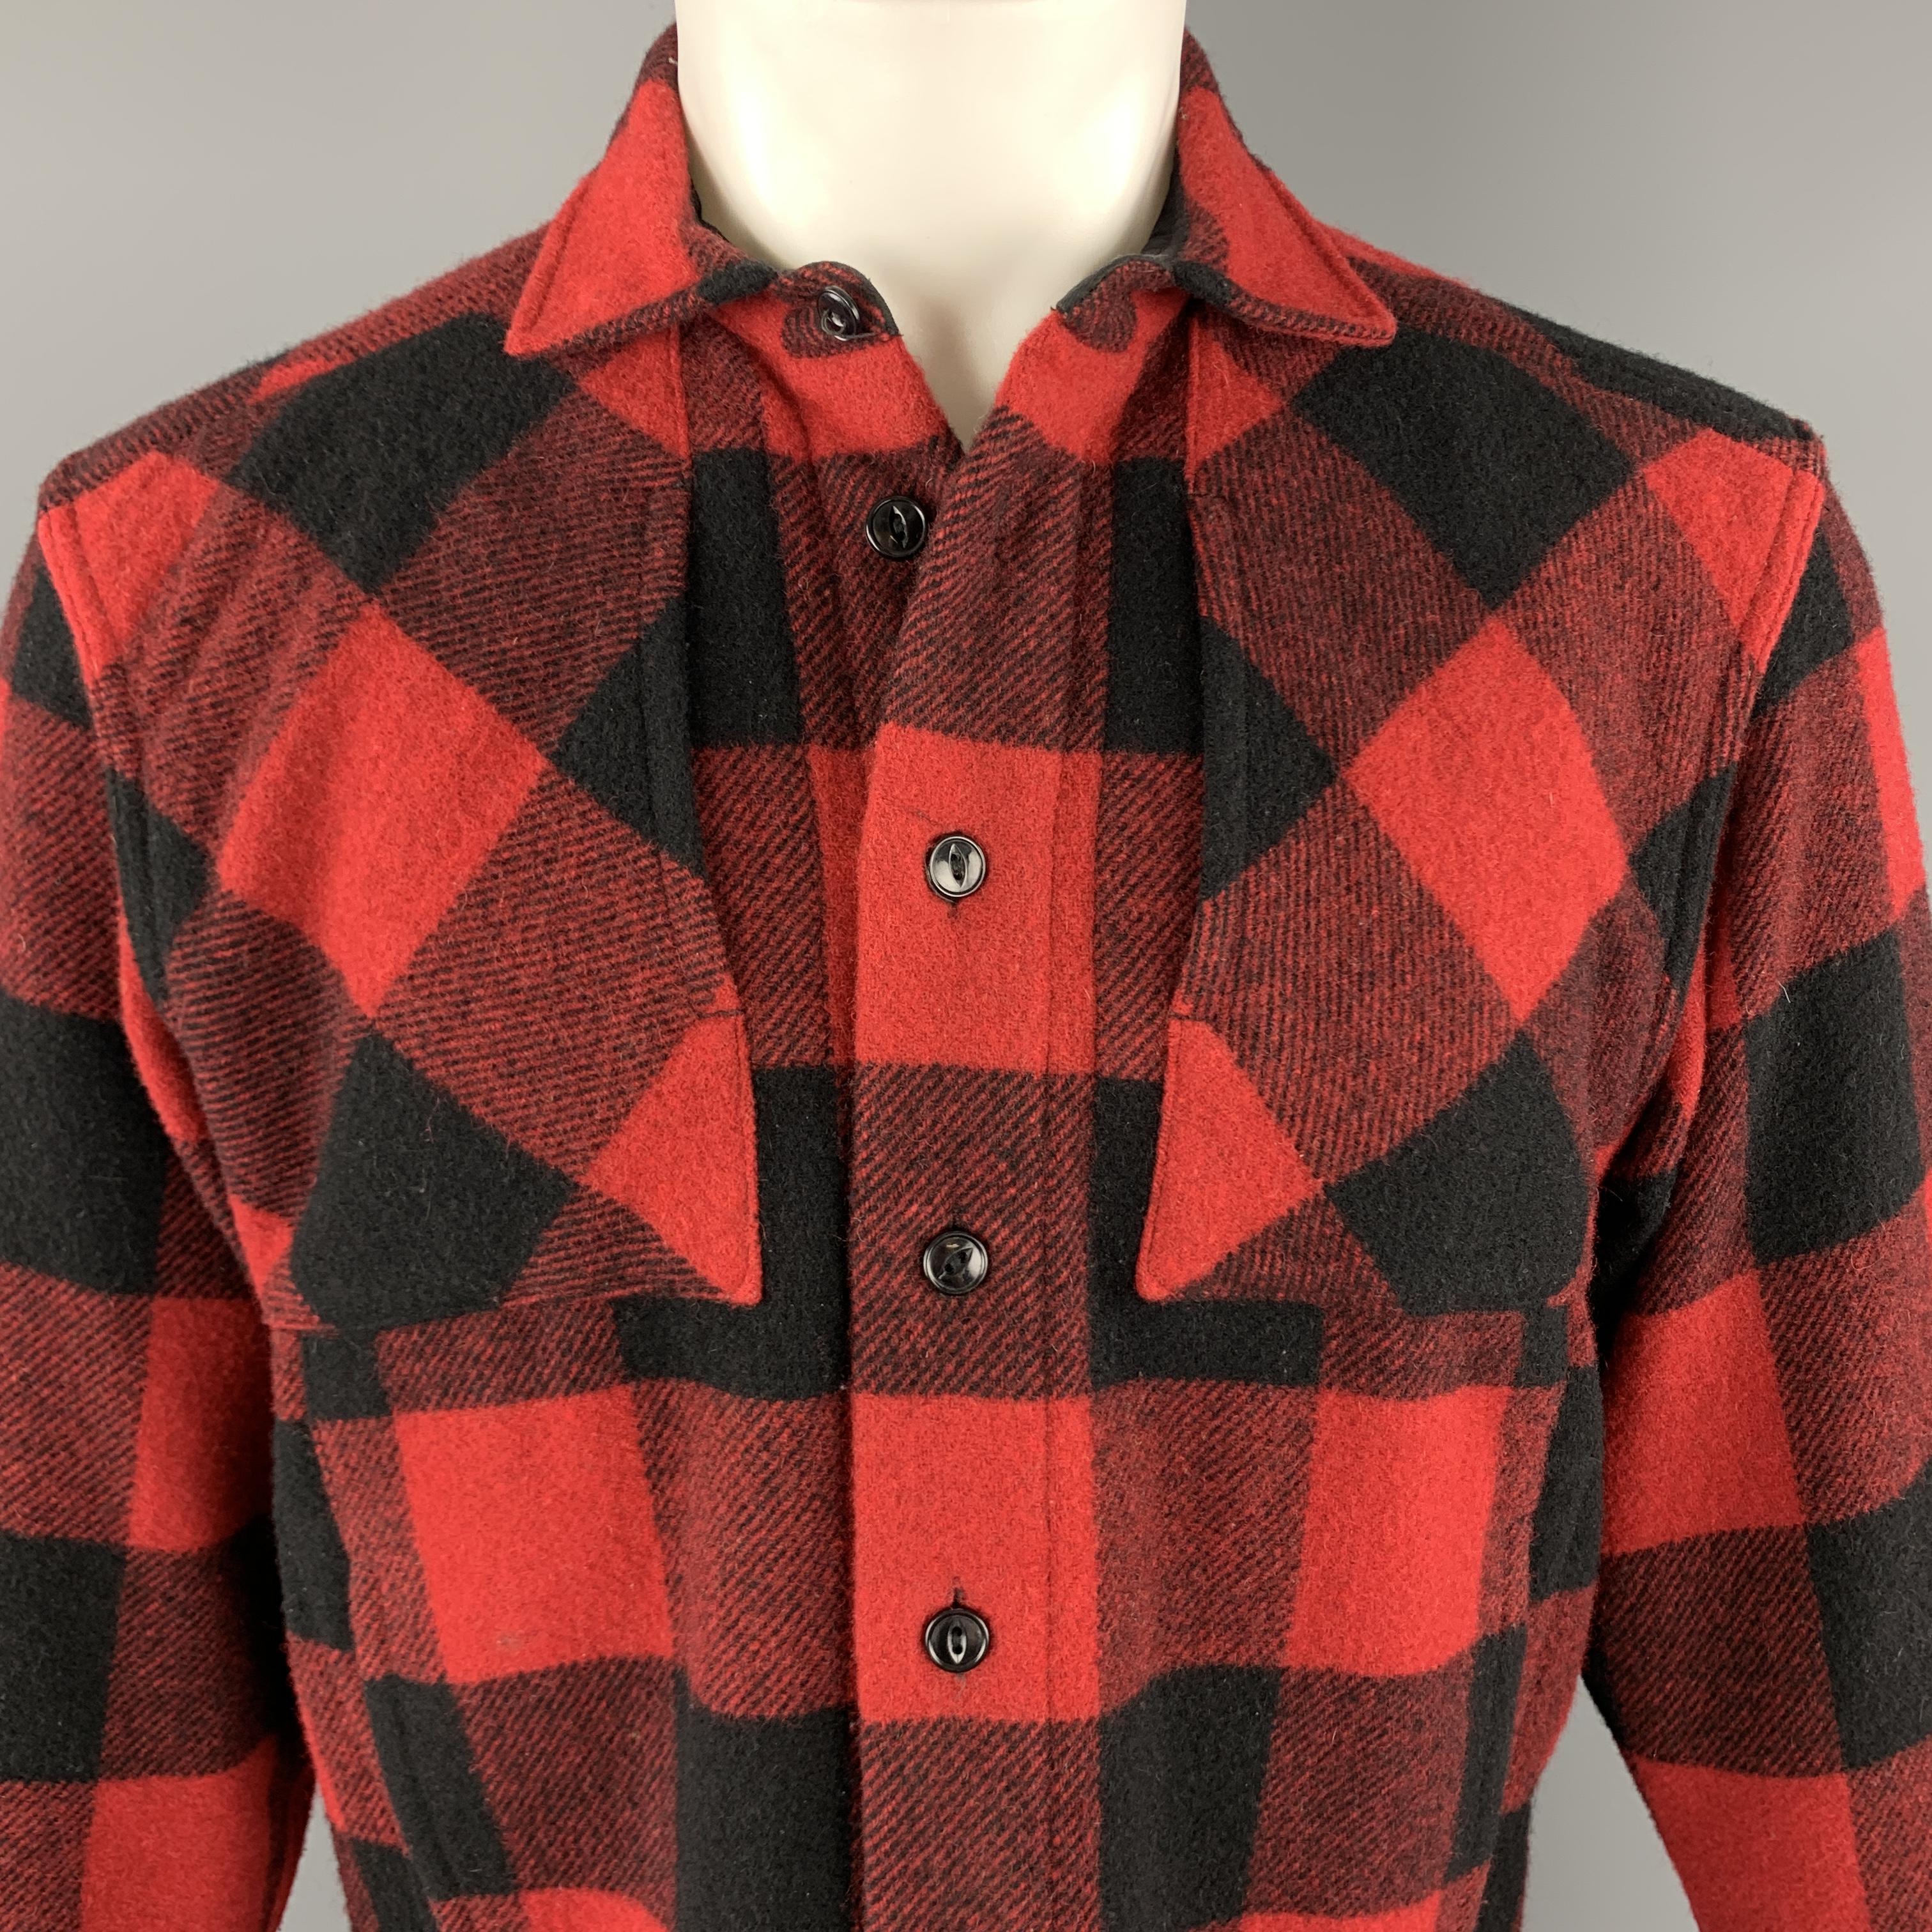 GANRYU Comme des Garcons flannel shirt comes in red and black wool blend with patch slit pockets. Minor Wear. Made in Japan.

Very Good Pre-Owned Condition.
Marked: S

Measurements:

Shoulder: 18 in.
Chest: 44 in.
Sleeve: 23 in.
Length: 26 in.